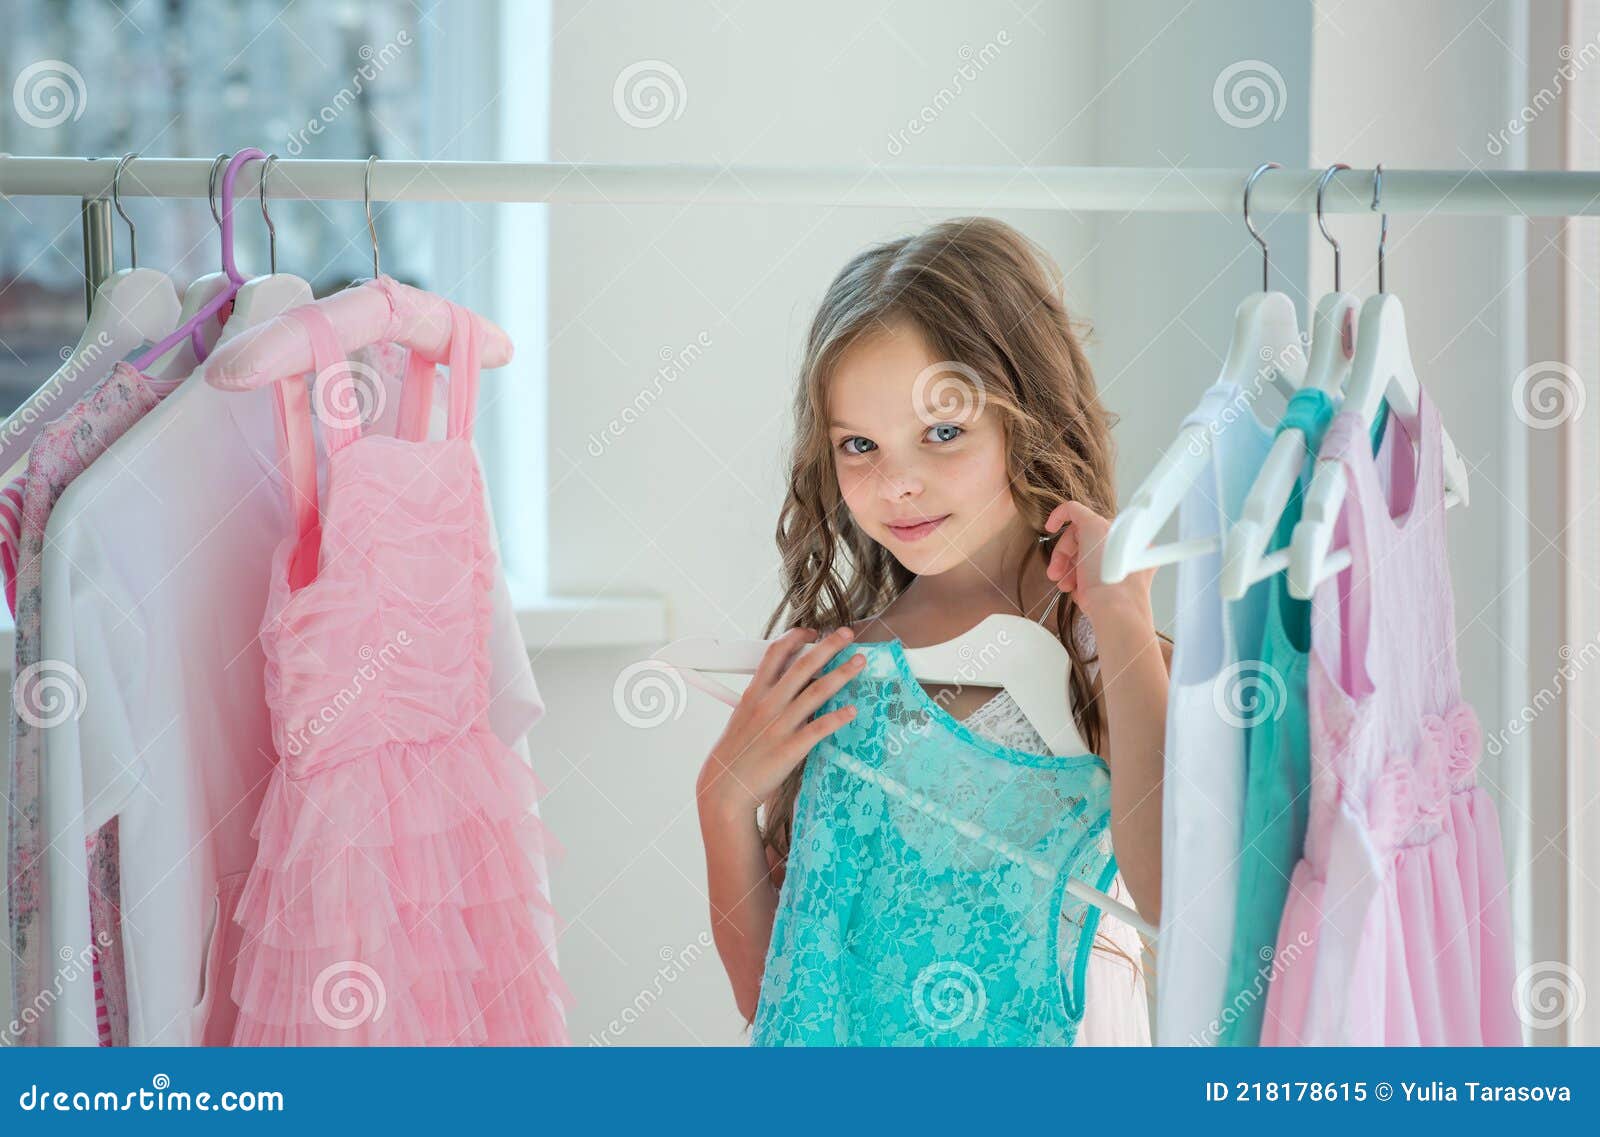 https://thumbs.dreamstime.com/z/little-child-girl-choosing-her-clothes-kid-thinking-what-to-choose-wear-front-many-choices-dresses-hangers-sales-buy-218178615.jpg